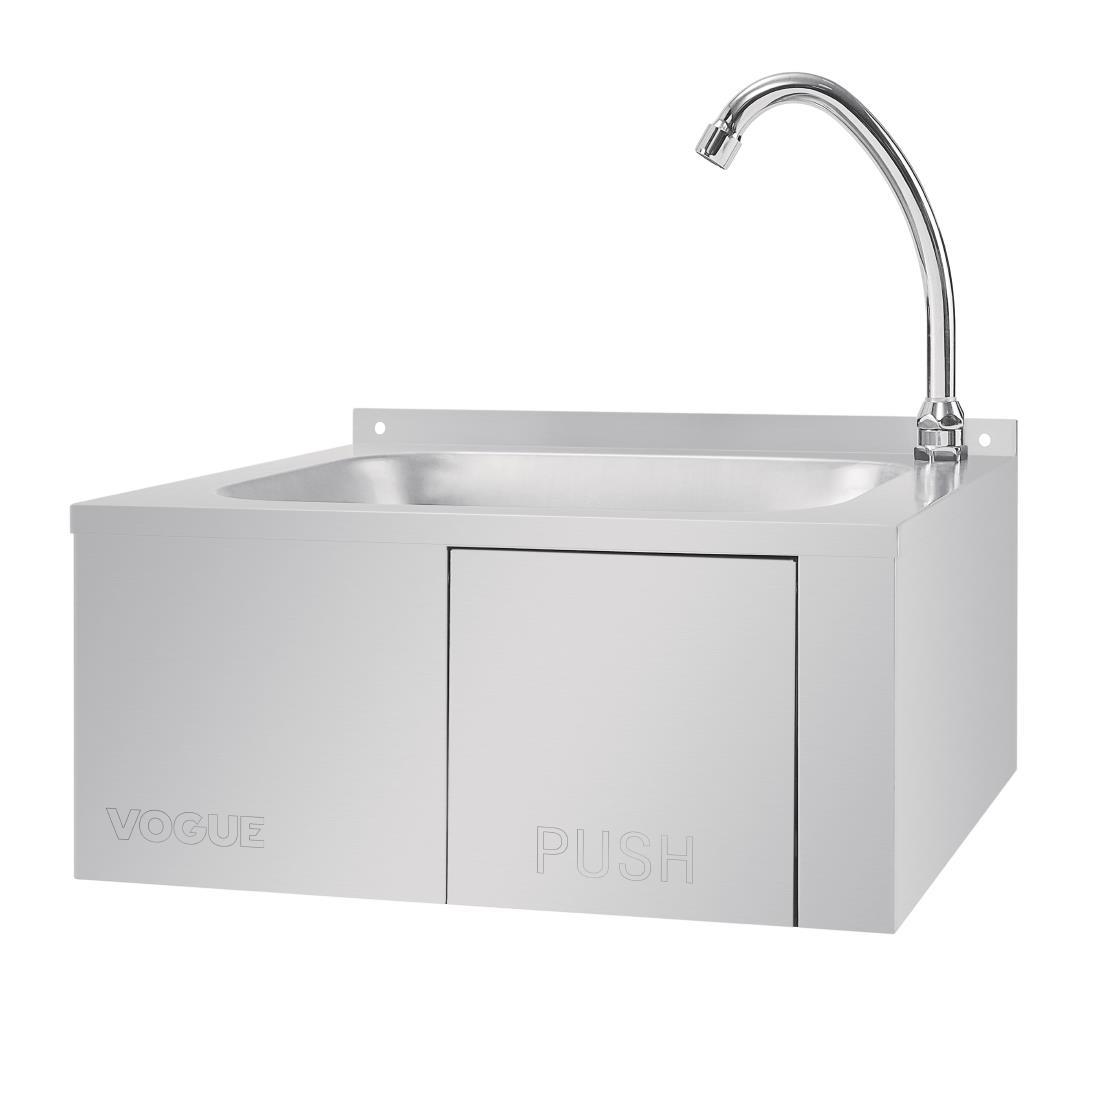 Vogue Stainless Steel Knee Operated Sink - GL280  - 1